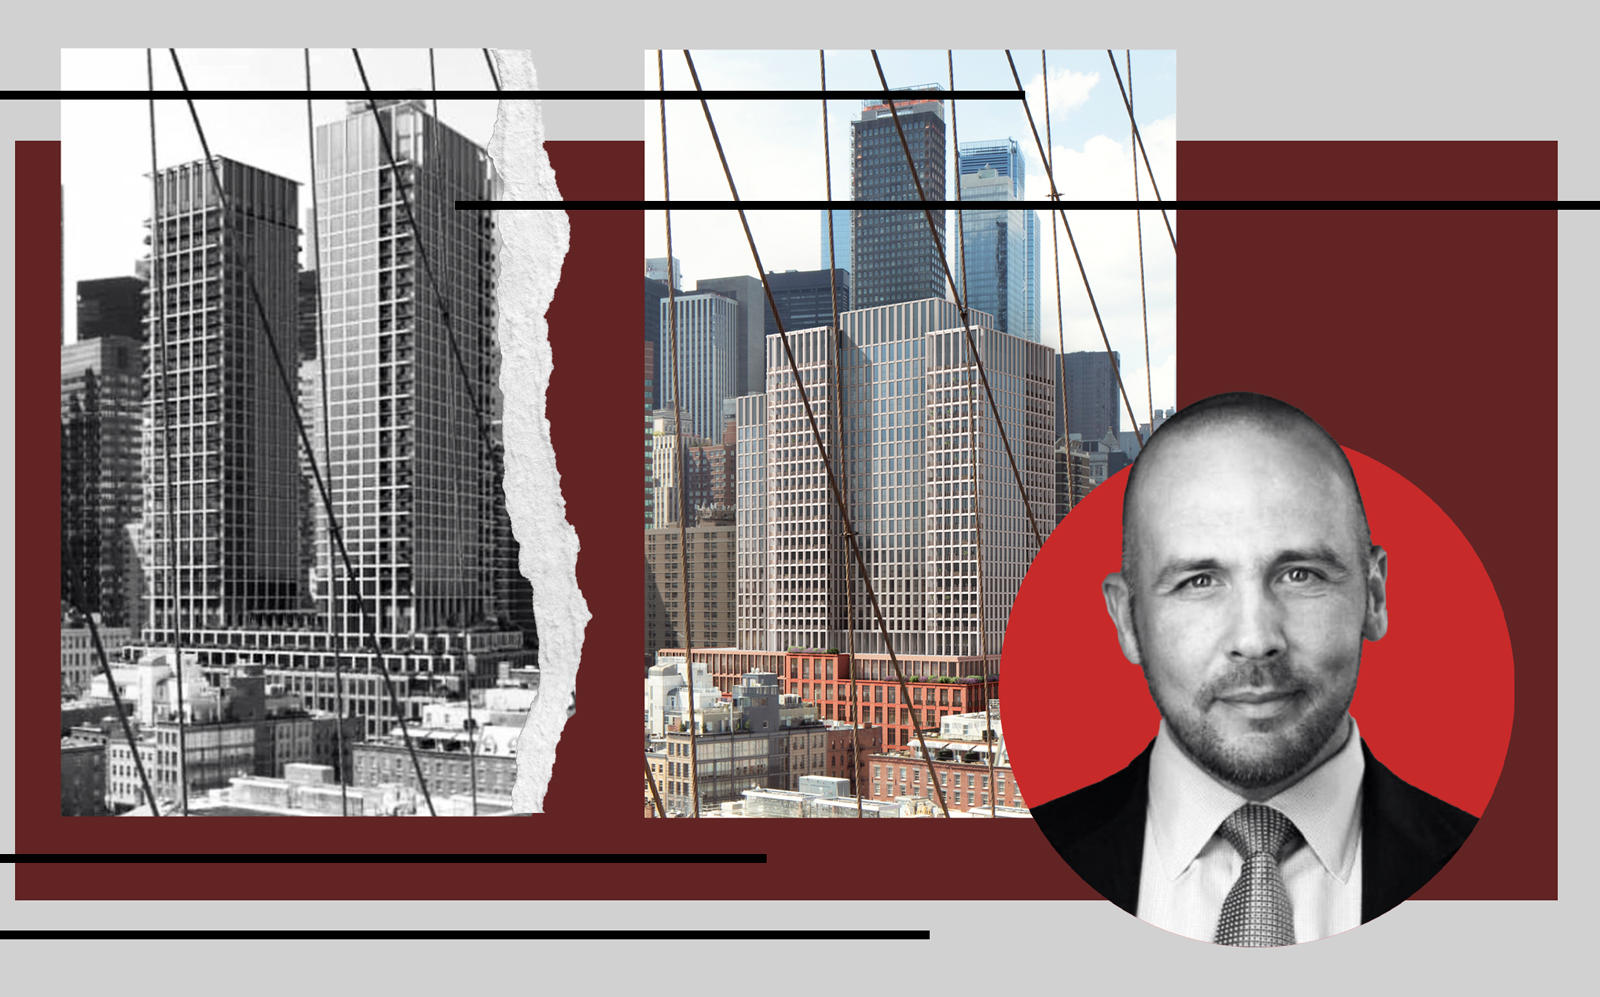 Previous rendering of 250 Water Street (left) and a new rendering (right) with Howard Hughes Corporation CEO David O’Reilly (The Howard Hughes Corporation/SOM)